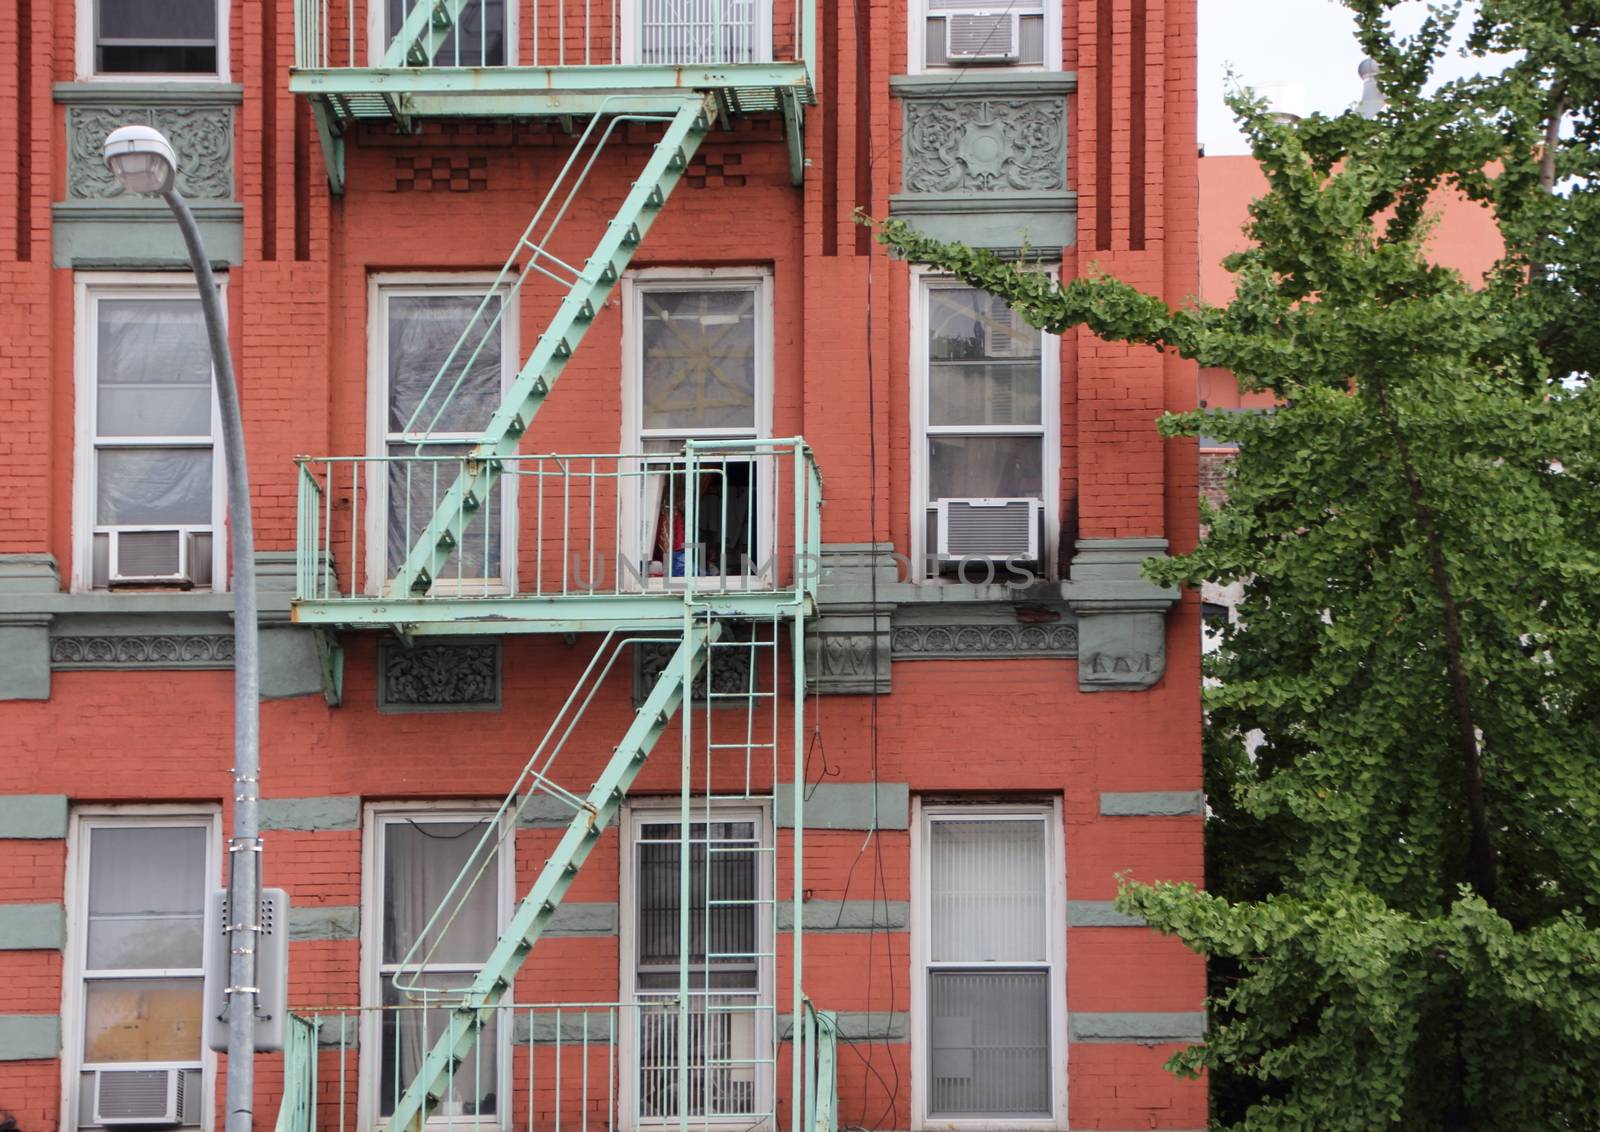 Green Metal Fire Escapes on Old Red Apartment Building in New York